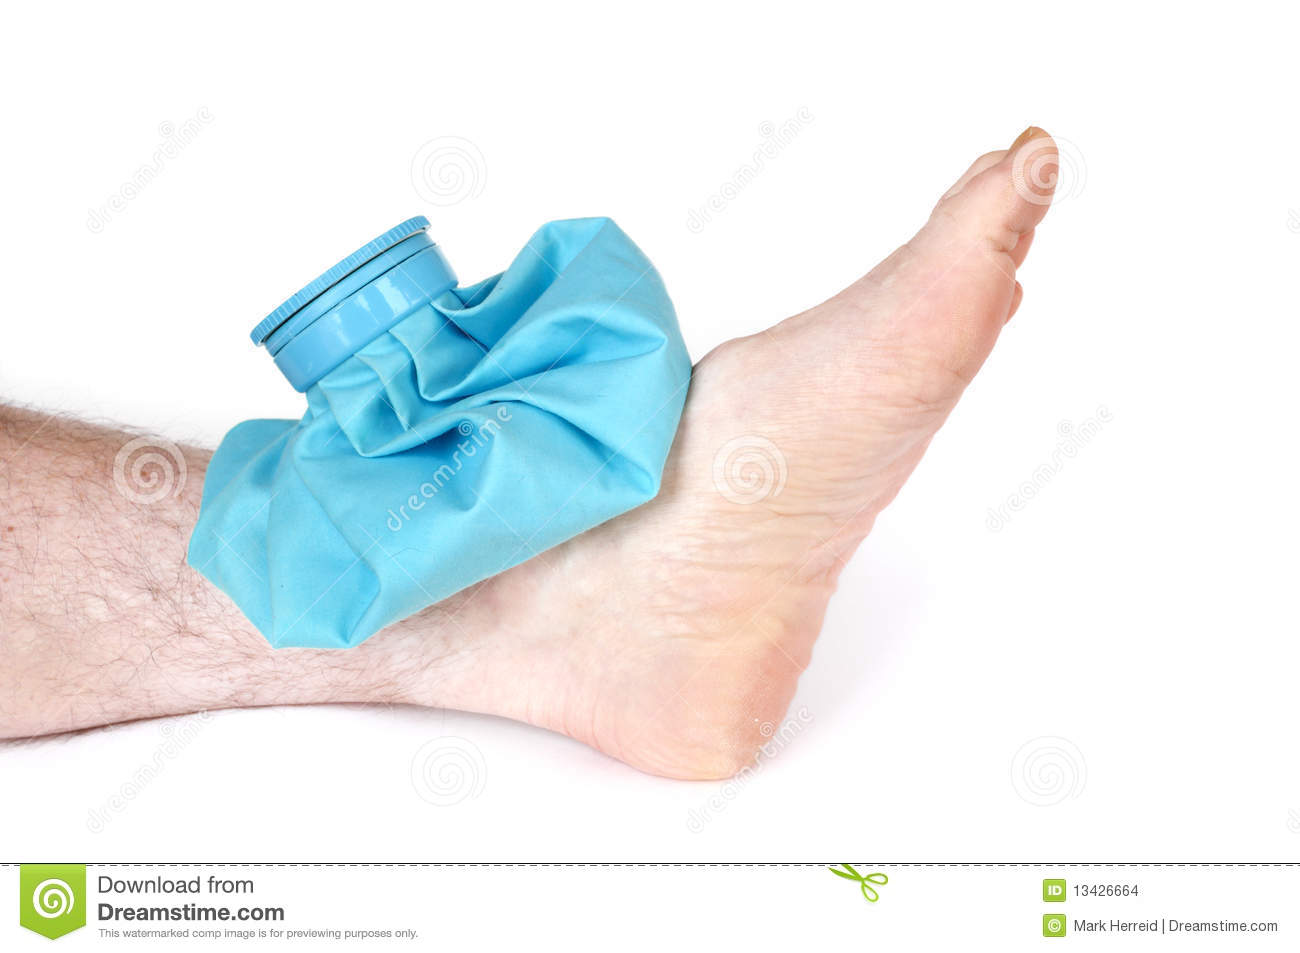 Icing A Sprained Ankle With Ice Pack Isolated On White